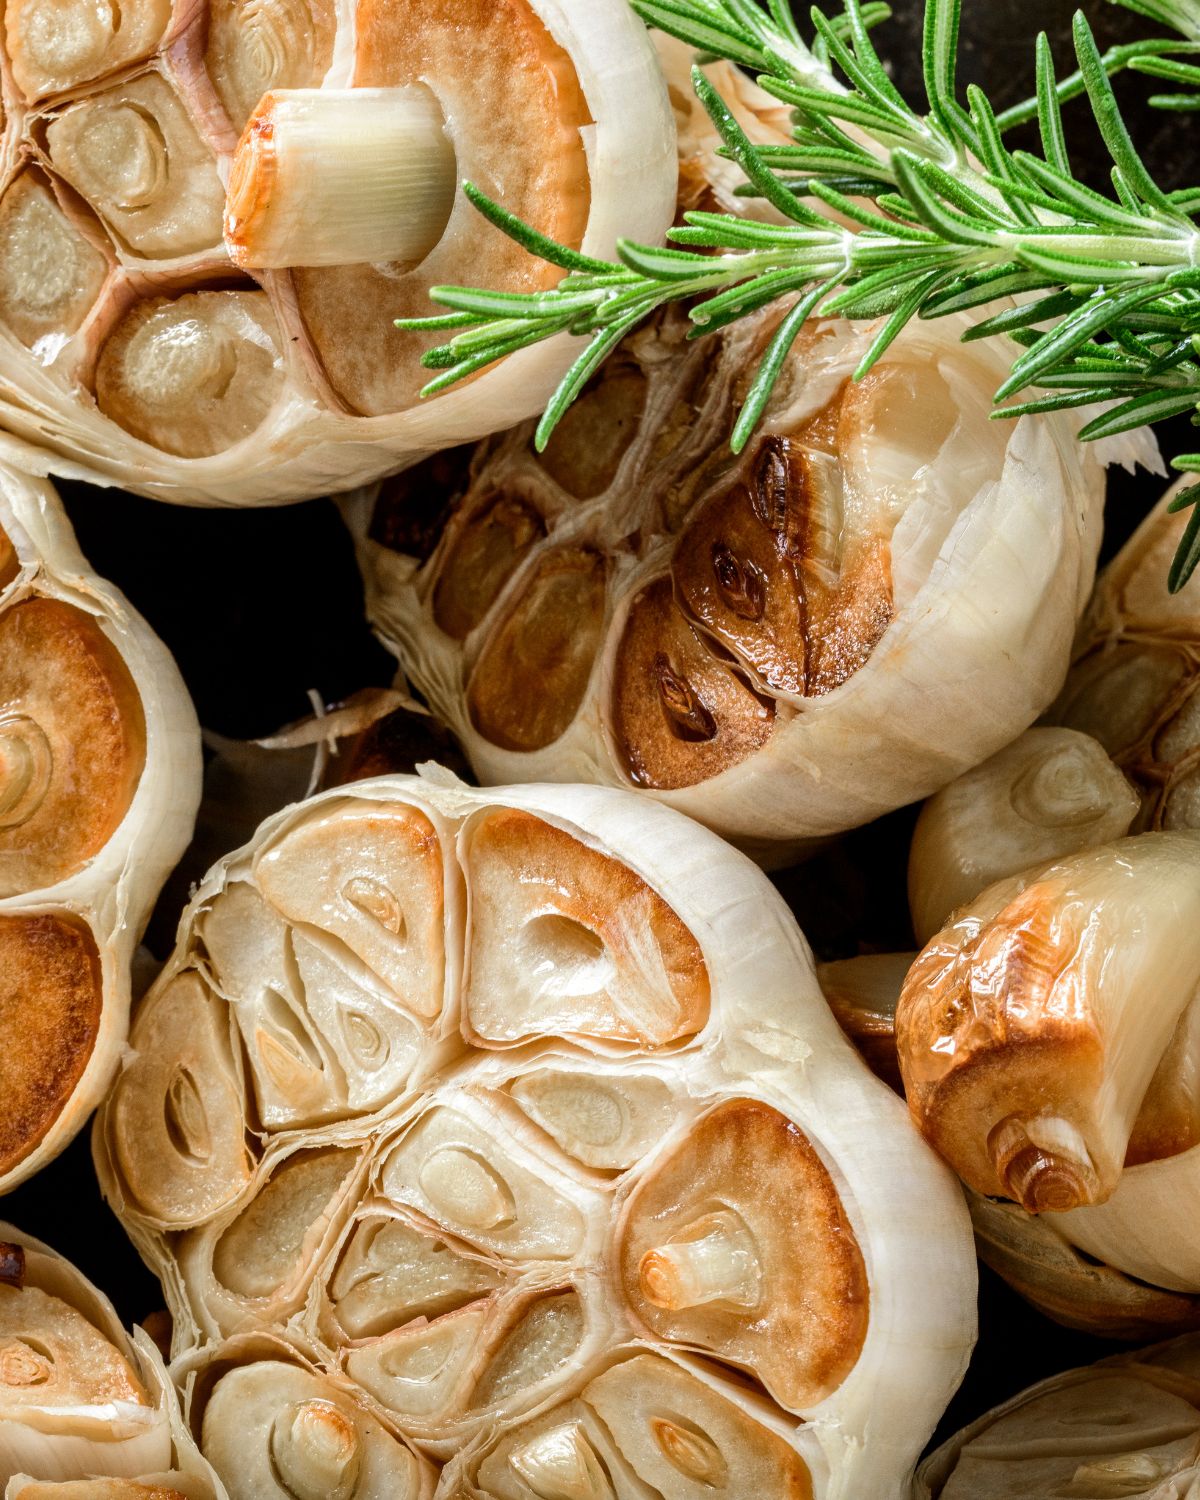 A group of oven roasted garlic cloves with a sprig of rosemary.